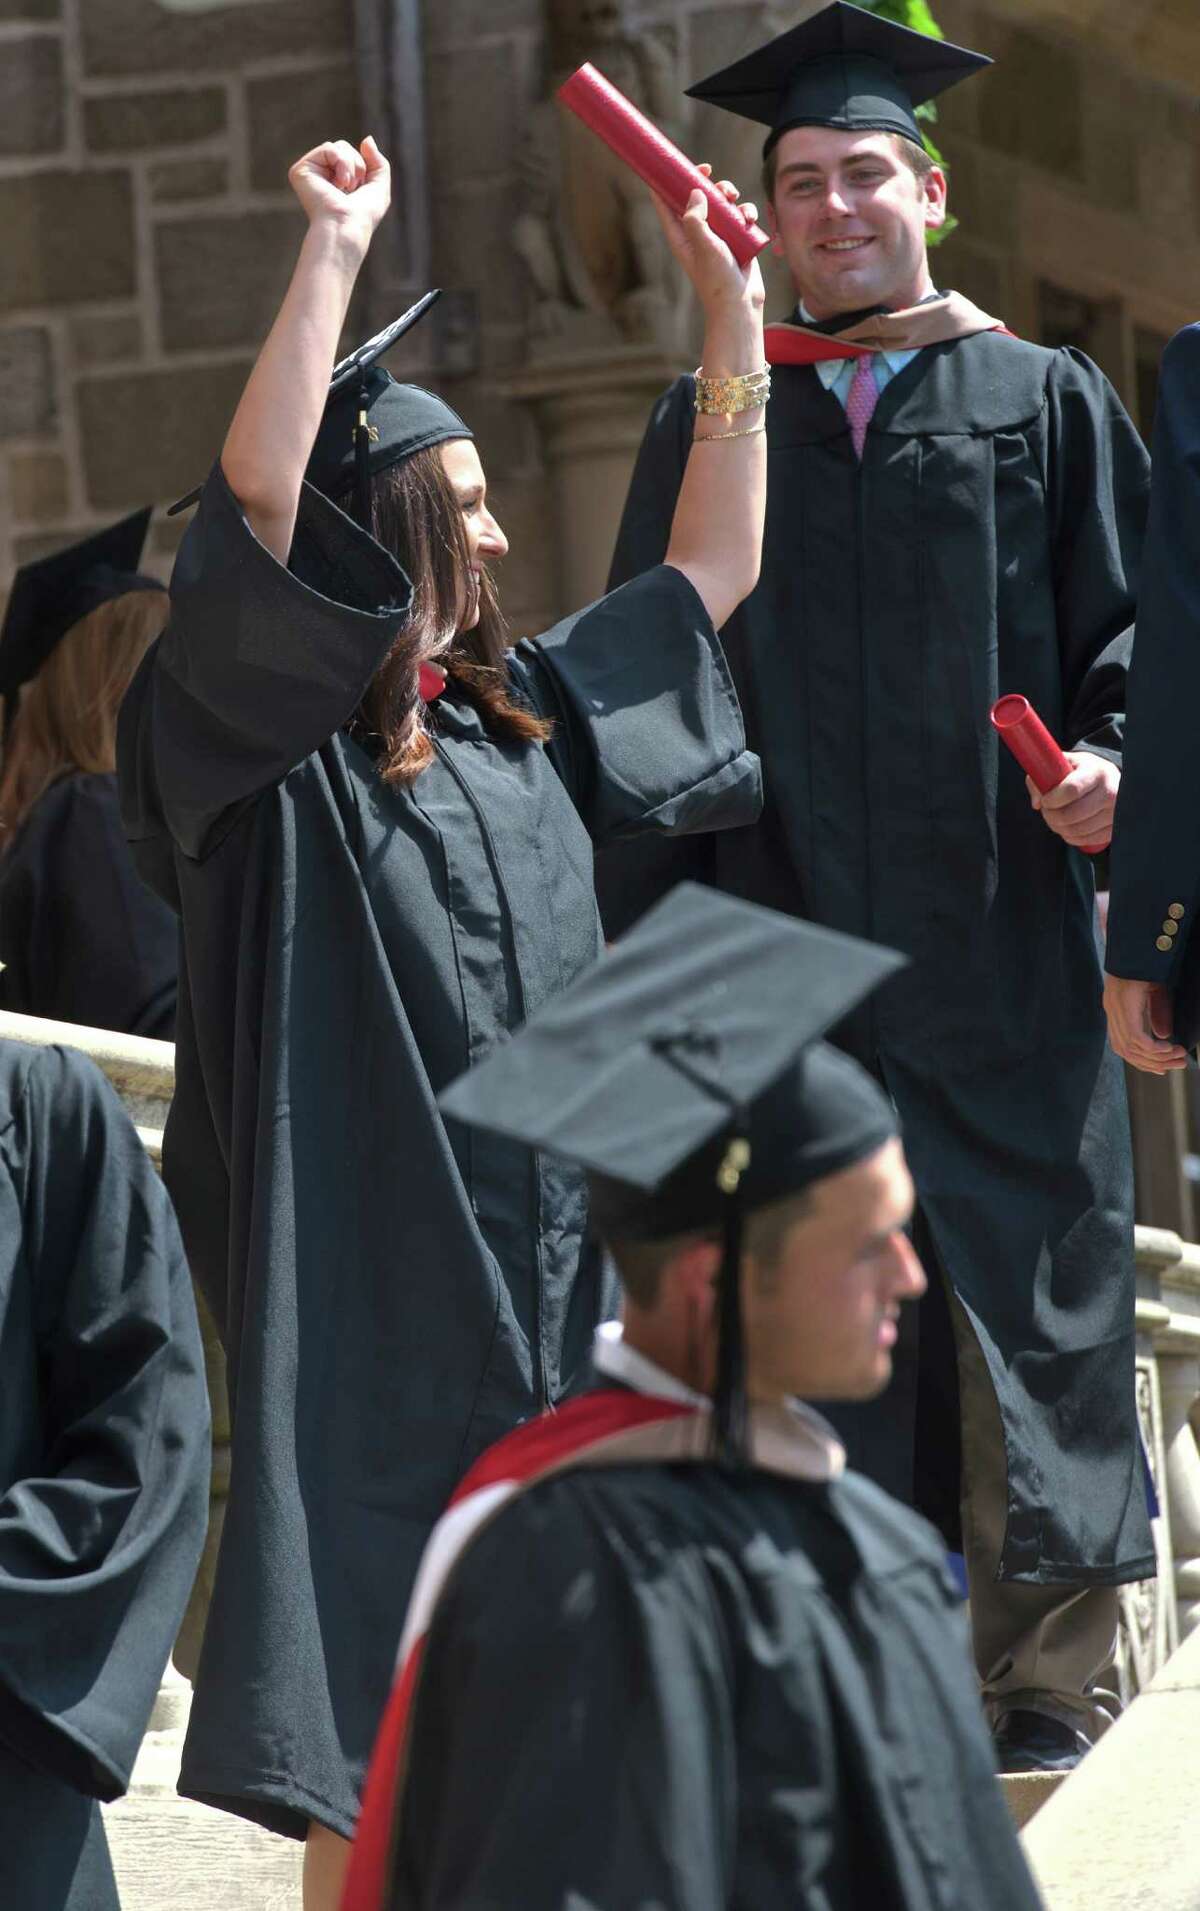 Charles F. Dolan School of Business graduate Ashley Scaglione during Fairfield University’s 2015 commencement ceremony.